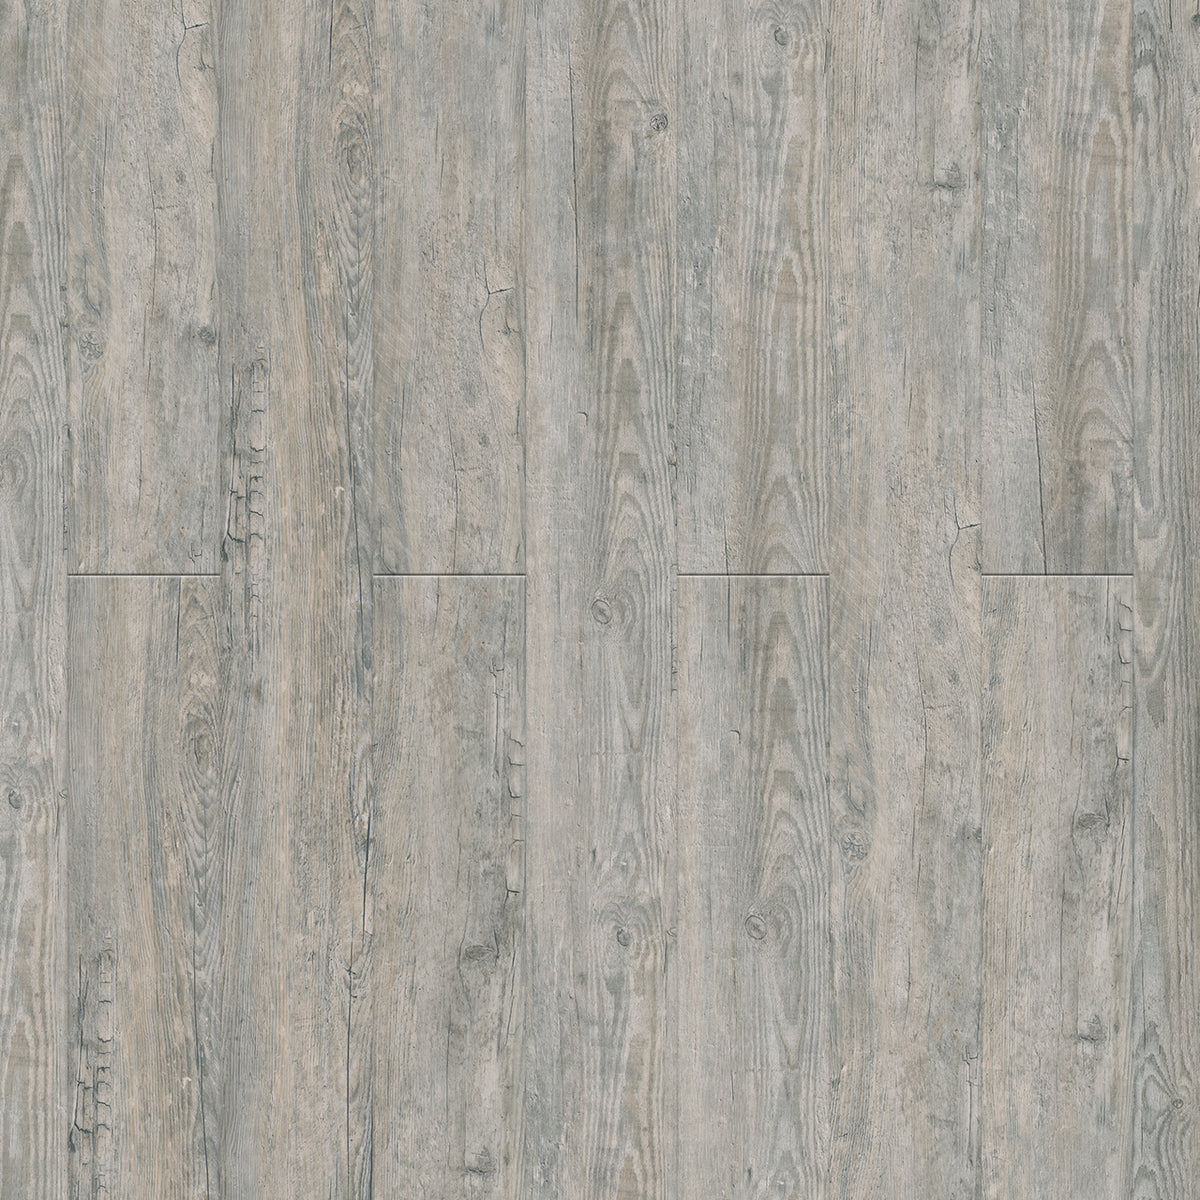 Engineered Floors - Triumph Collection - The New Standard II - 6 in. x 48 in. - Aruba